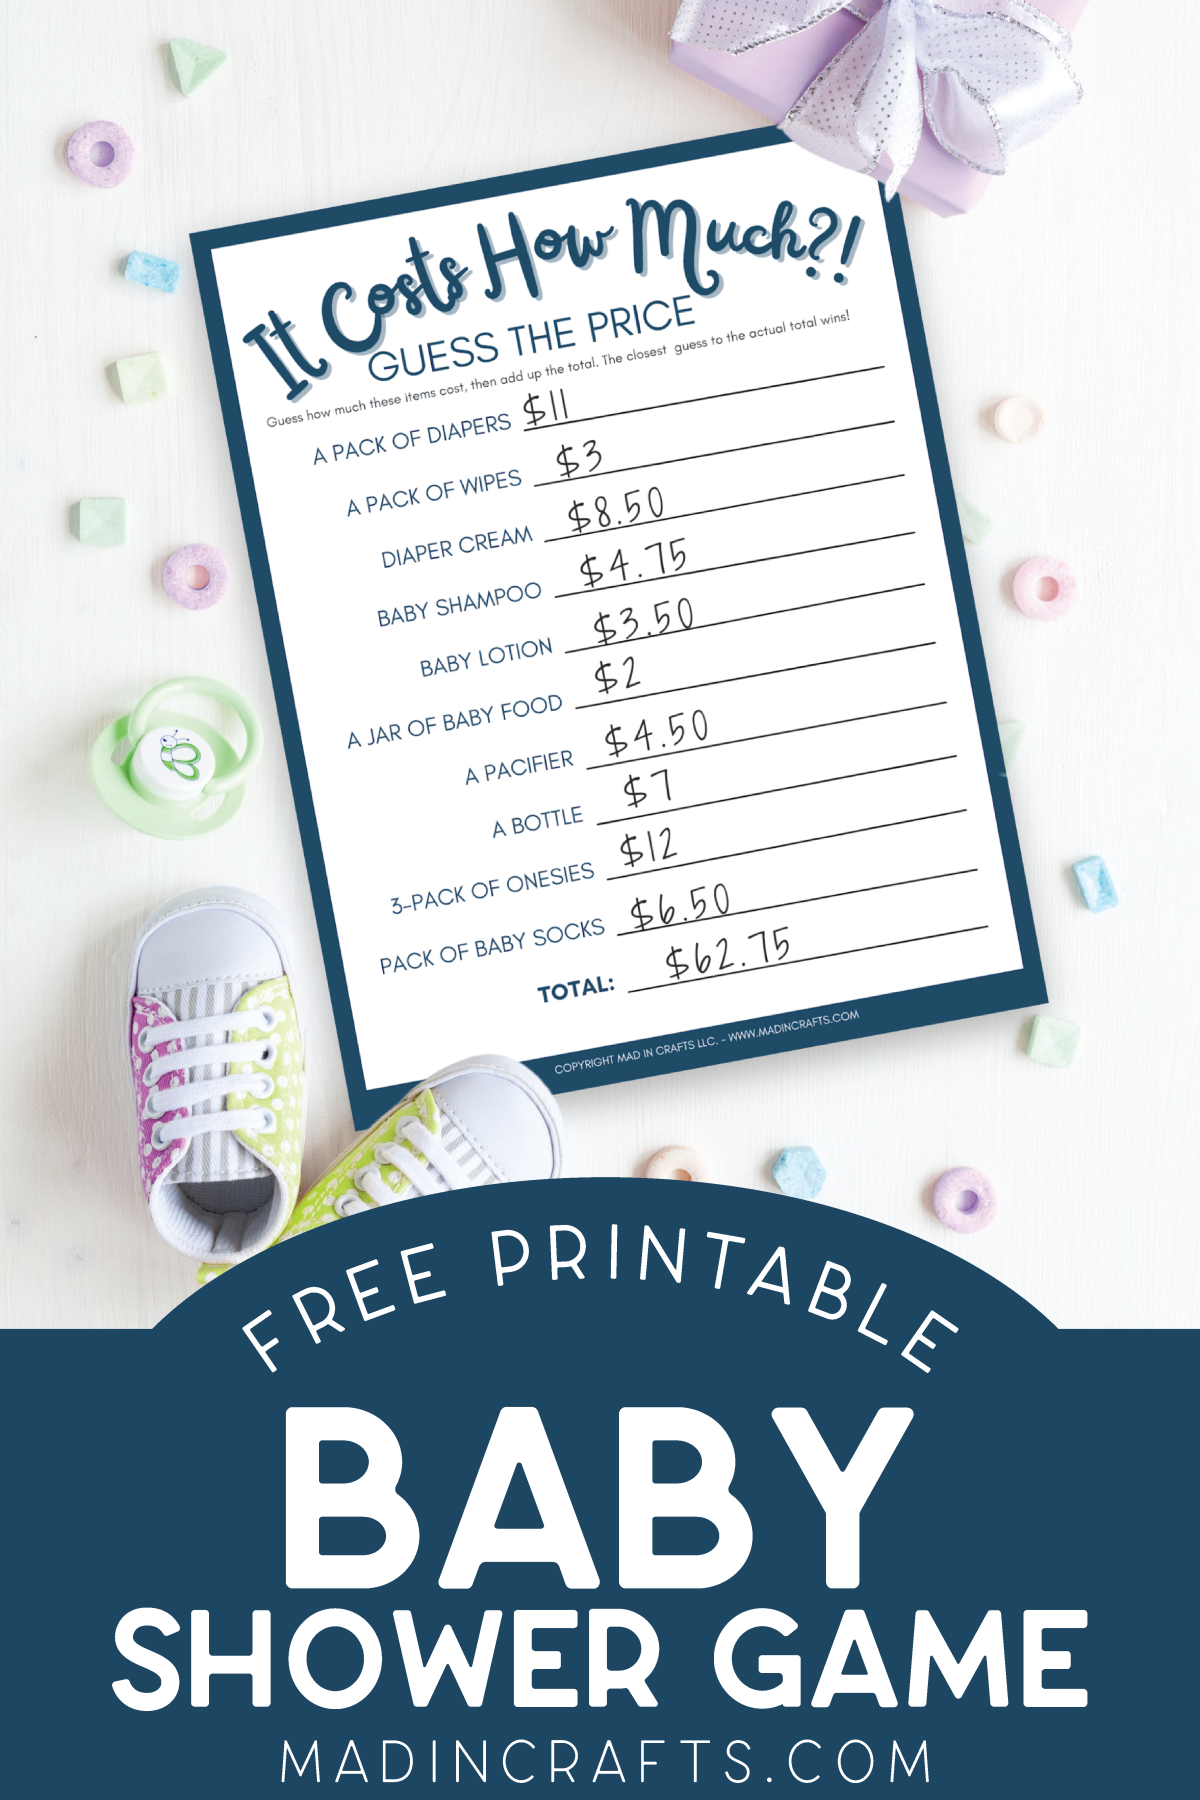 FREE PRINTABLE BABY SHOWER GAME Entertaining Mad in Crafts